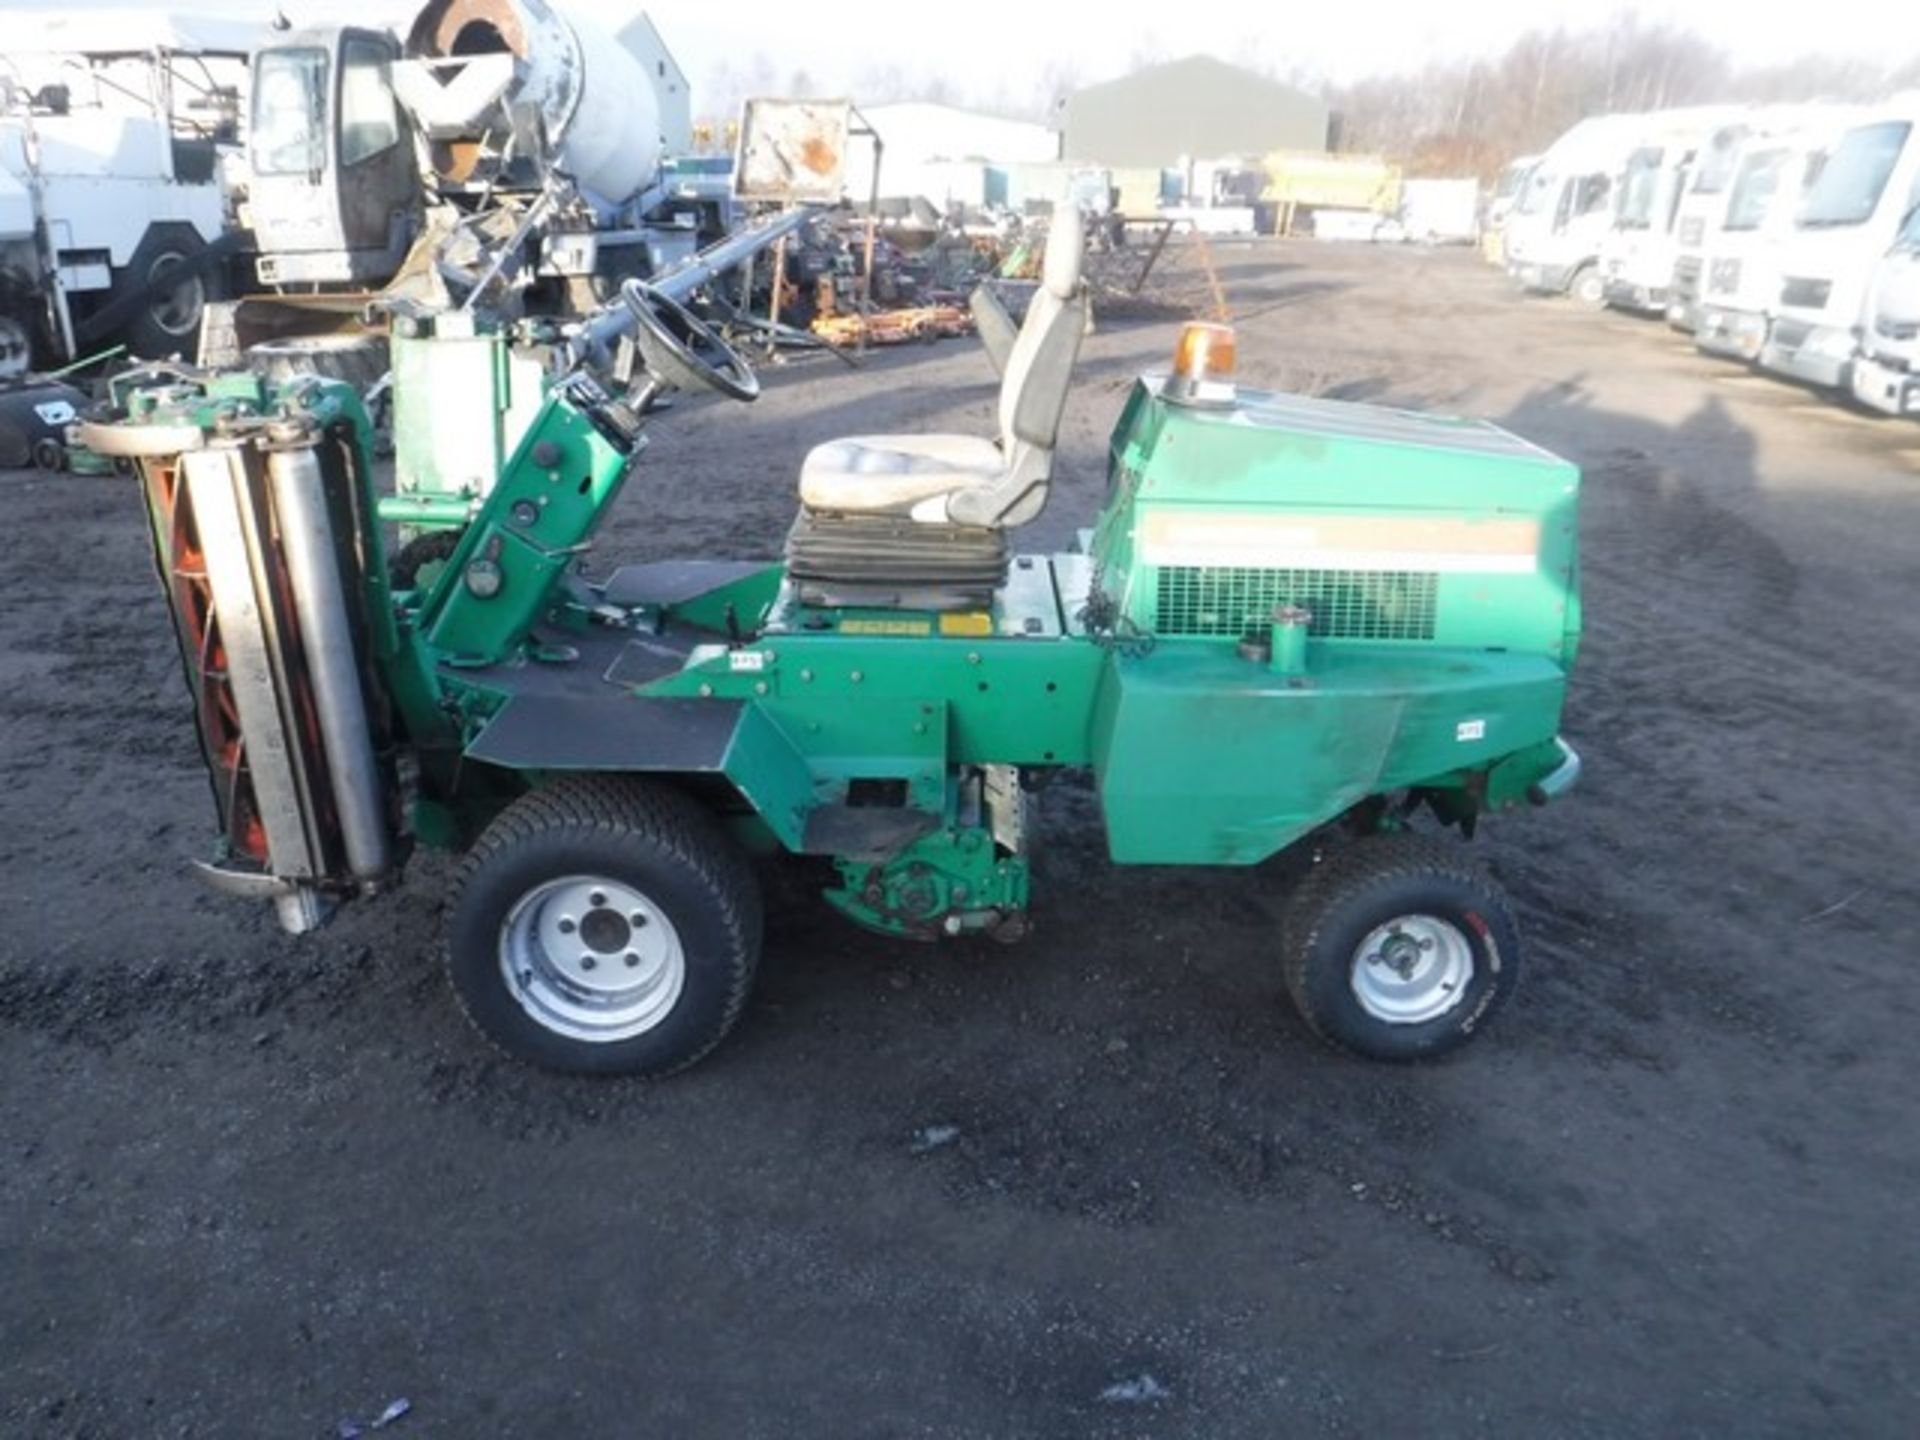 RANSOMES highway mower 3075 hrs.S/N WJ000567. Reg No SN51 ZXC - Image 4 of 7